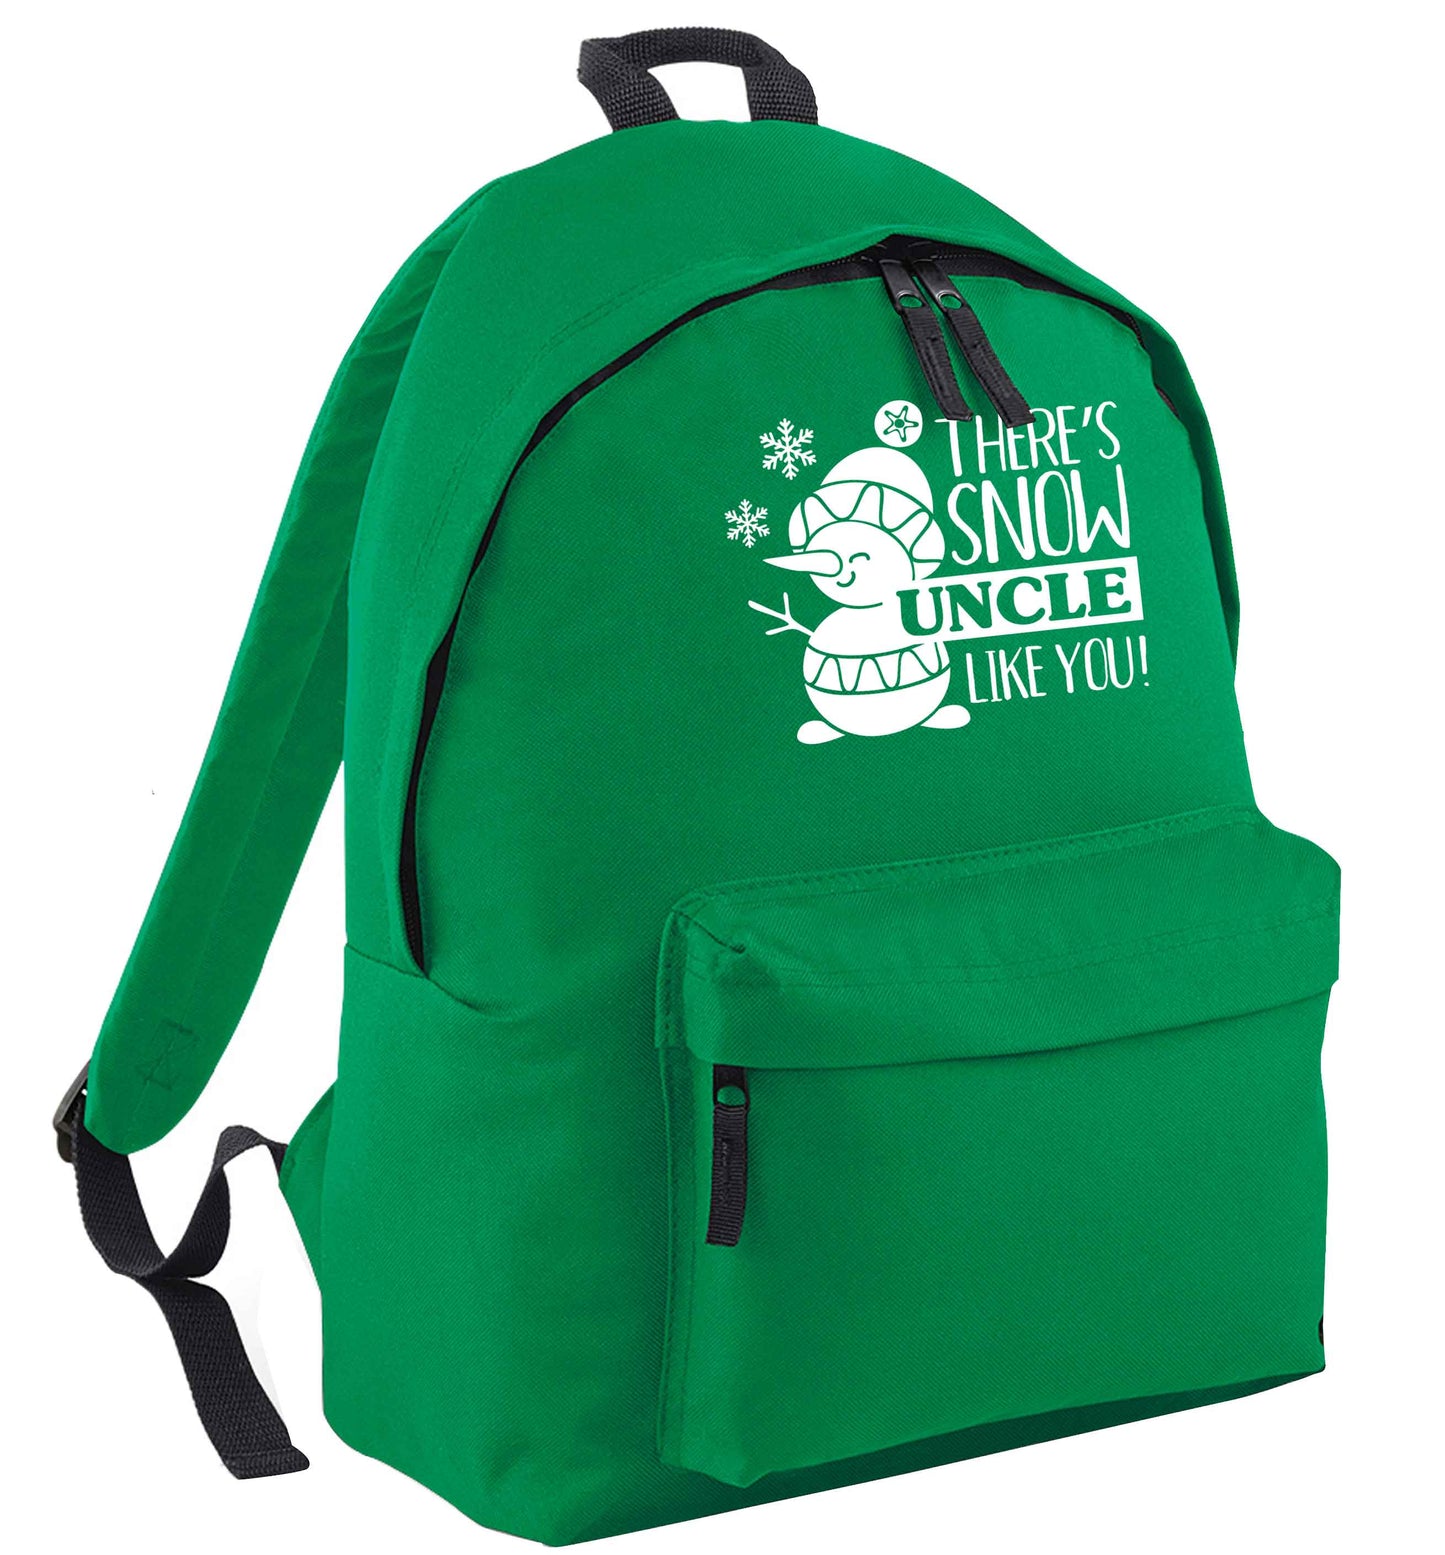 There's snow uncle like you green adults backpack